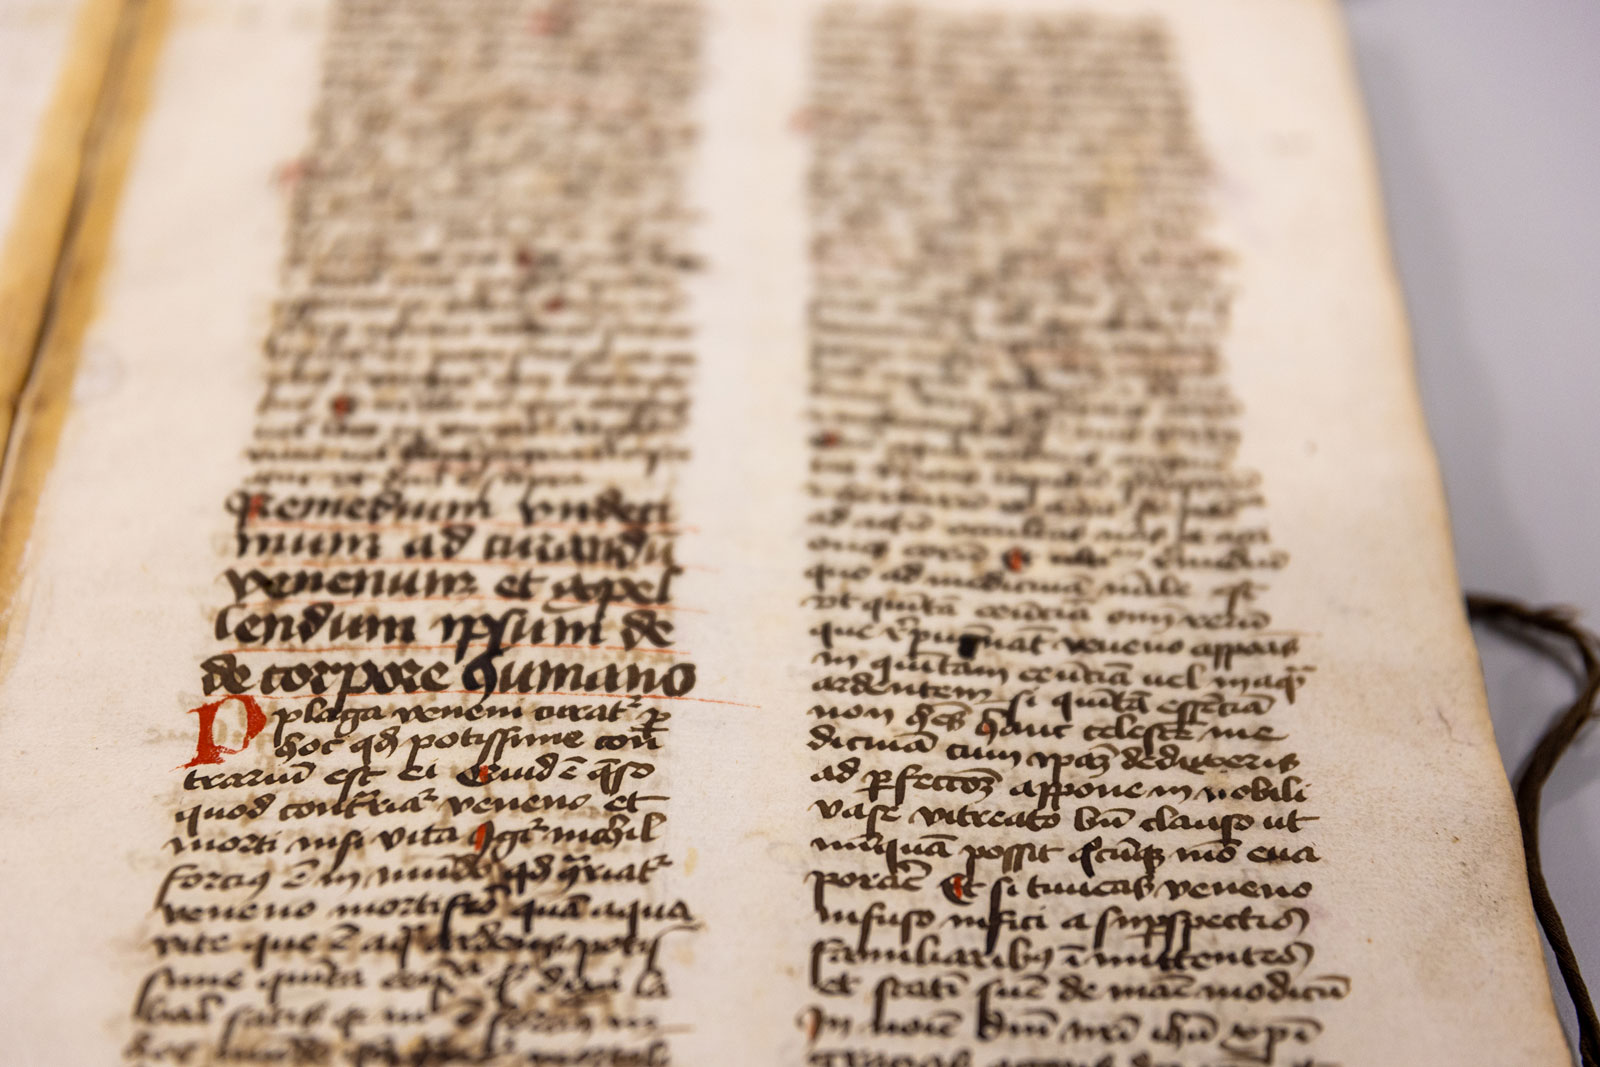 Like many texts of its era, the manuscript was penned on highly durable parchment made of animal hide.